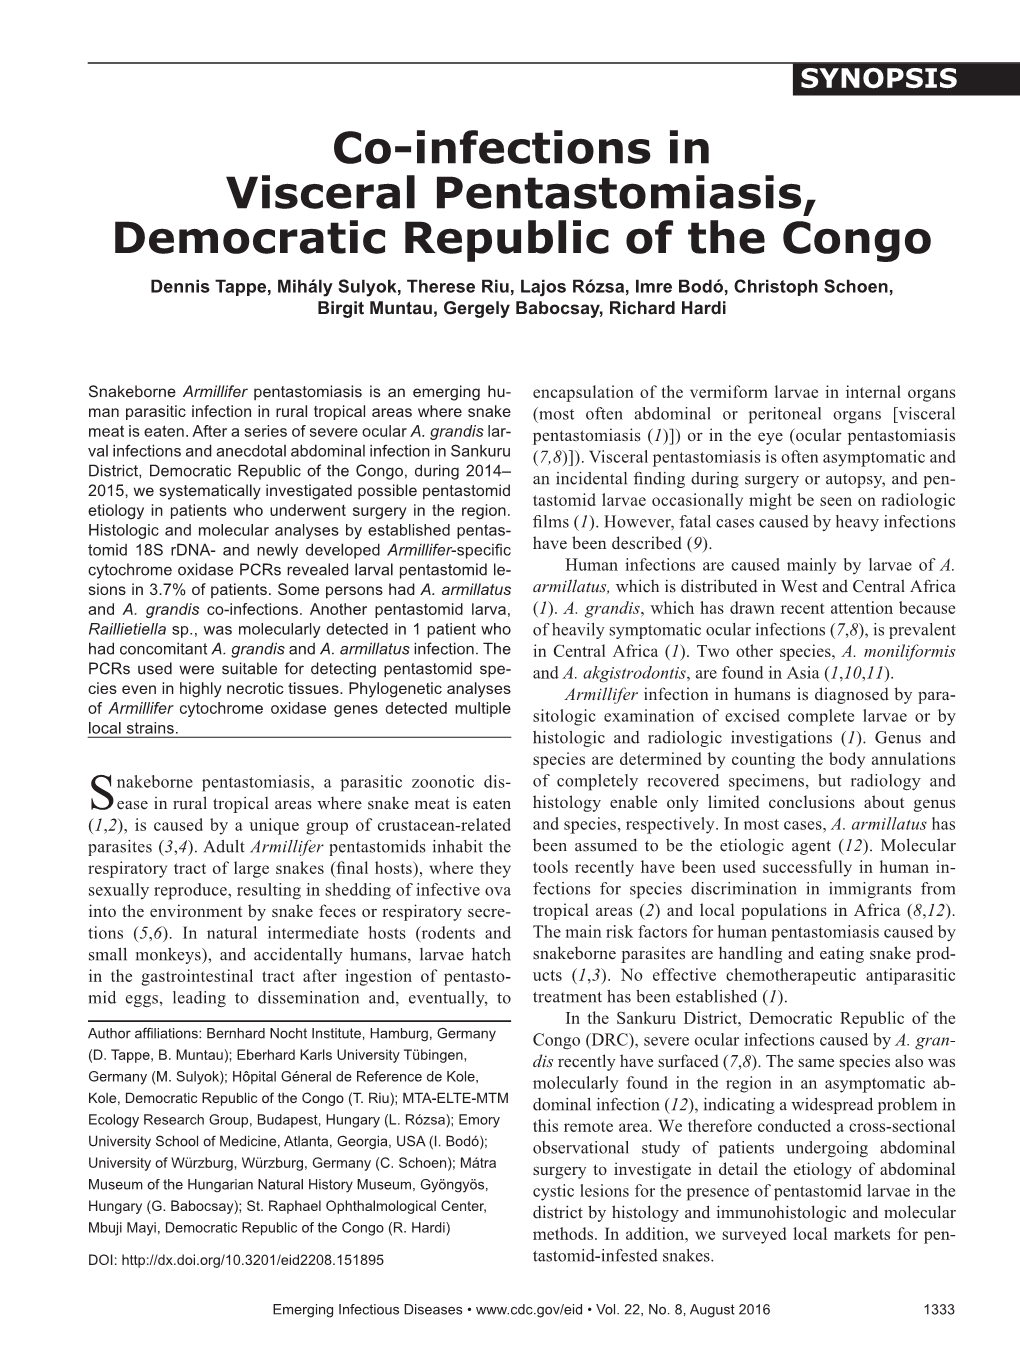 Co-Infections in Visceral Pentastomiasis, Democratic